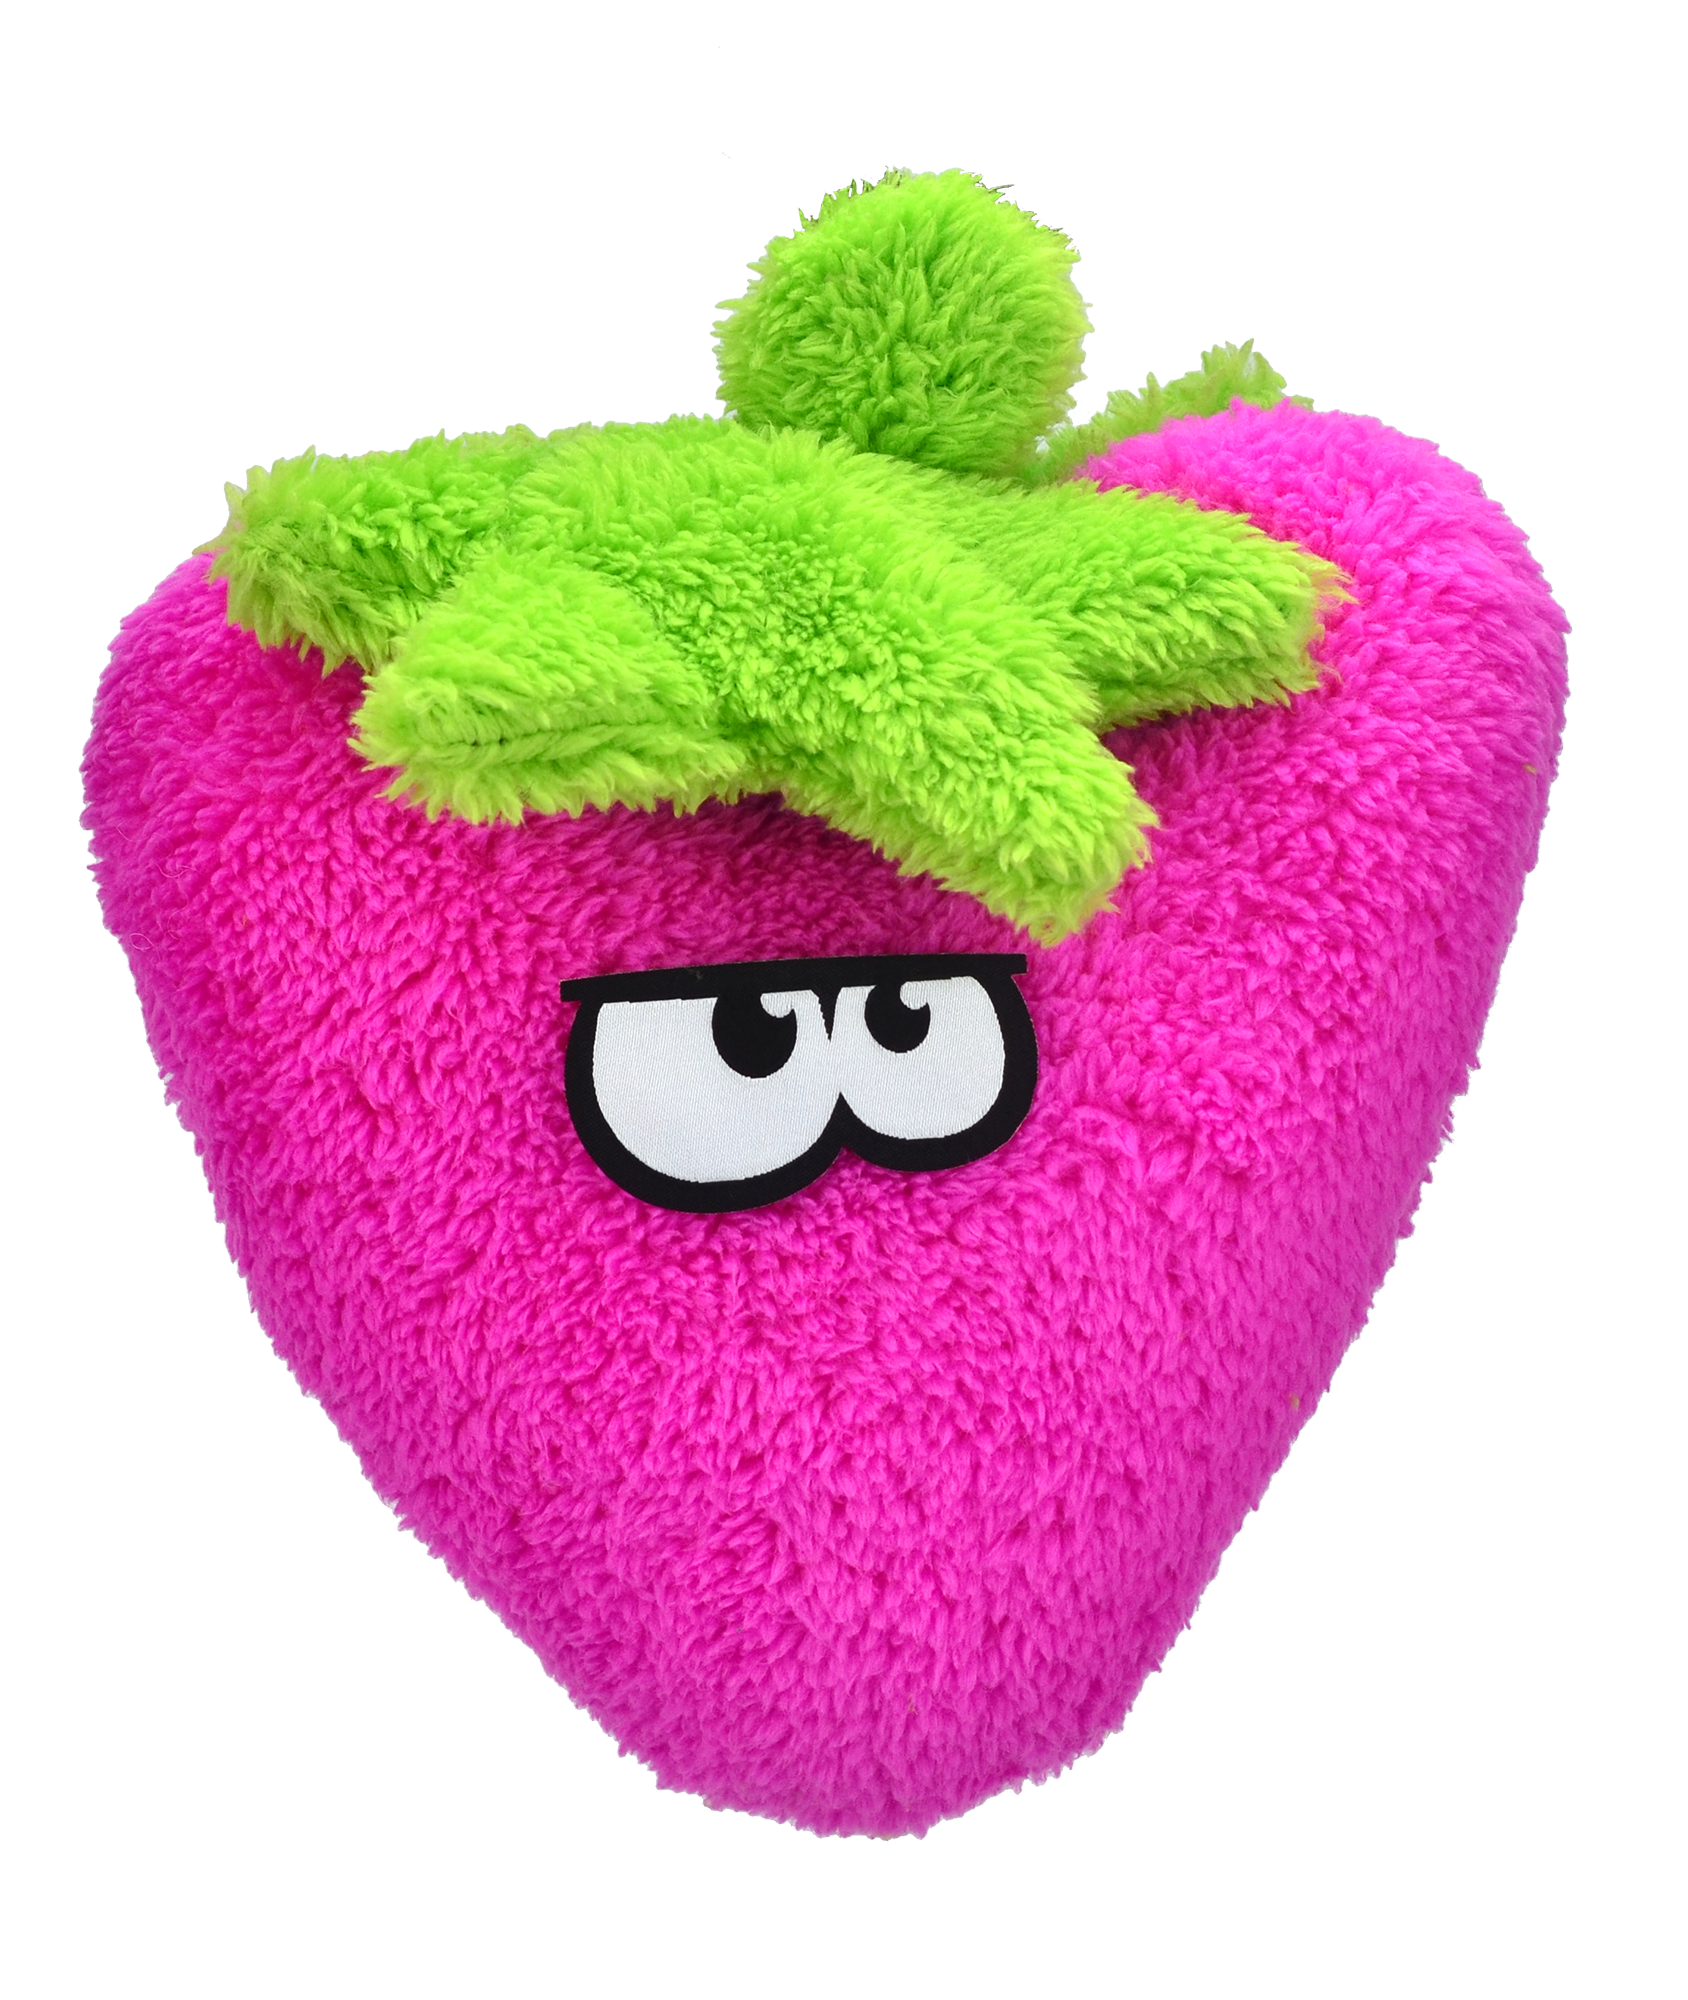 The Duraplush Strawberry dog toy is durable, soft, eco-friendly, and made in the USA. It features a Duraplush 2-ply bonded outer material, Stitchguard internal seams, and eco-fill recycled filling. Toy does not contain an internal squeaker.